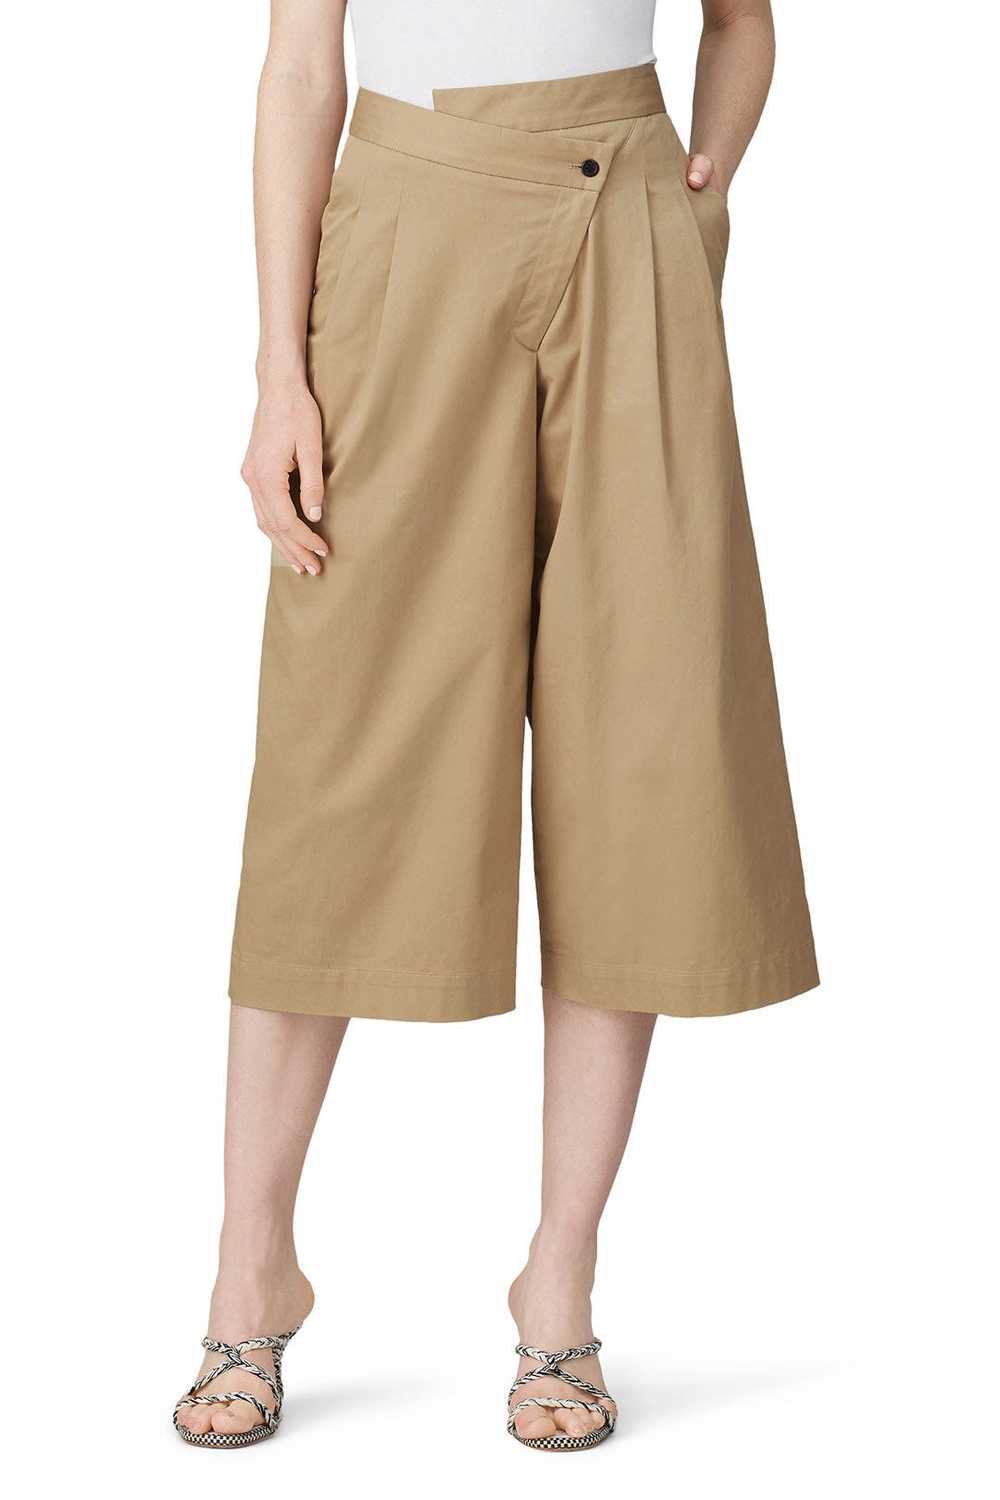 Monse Pleated Front Culottes - image 2